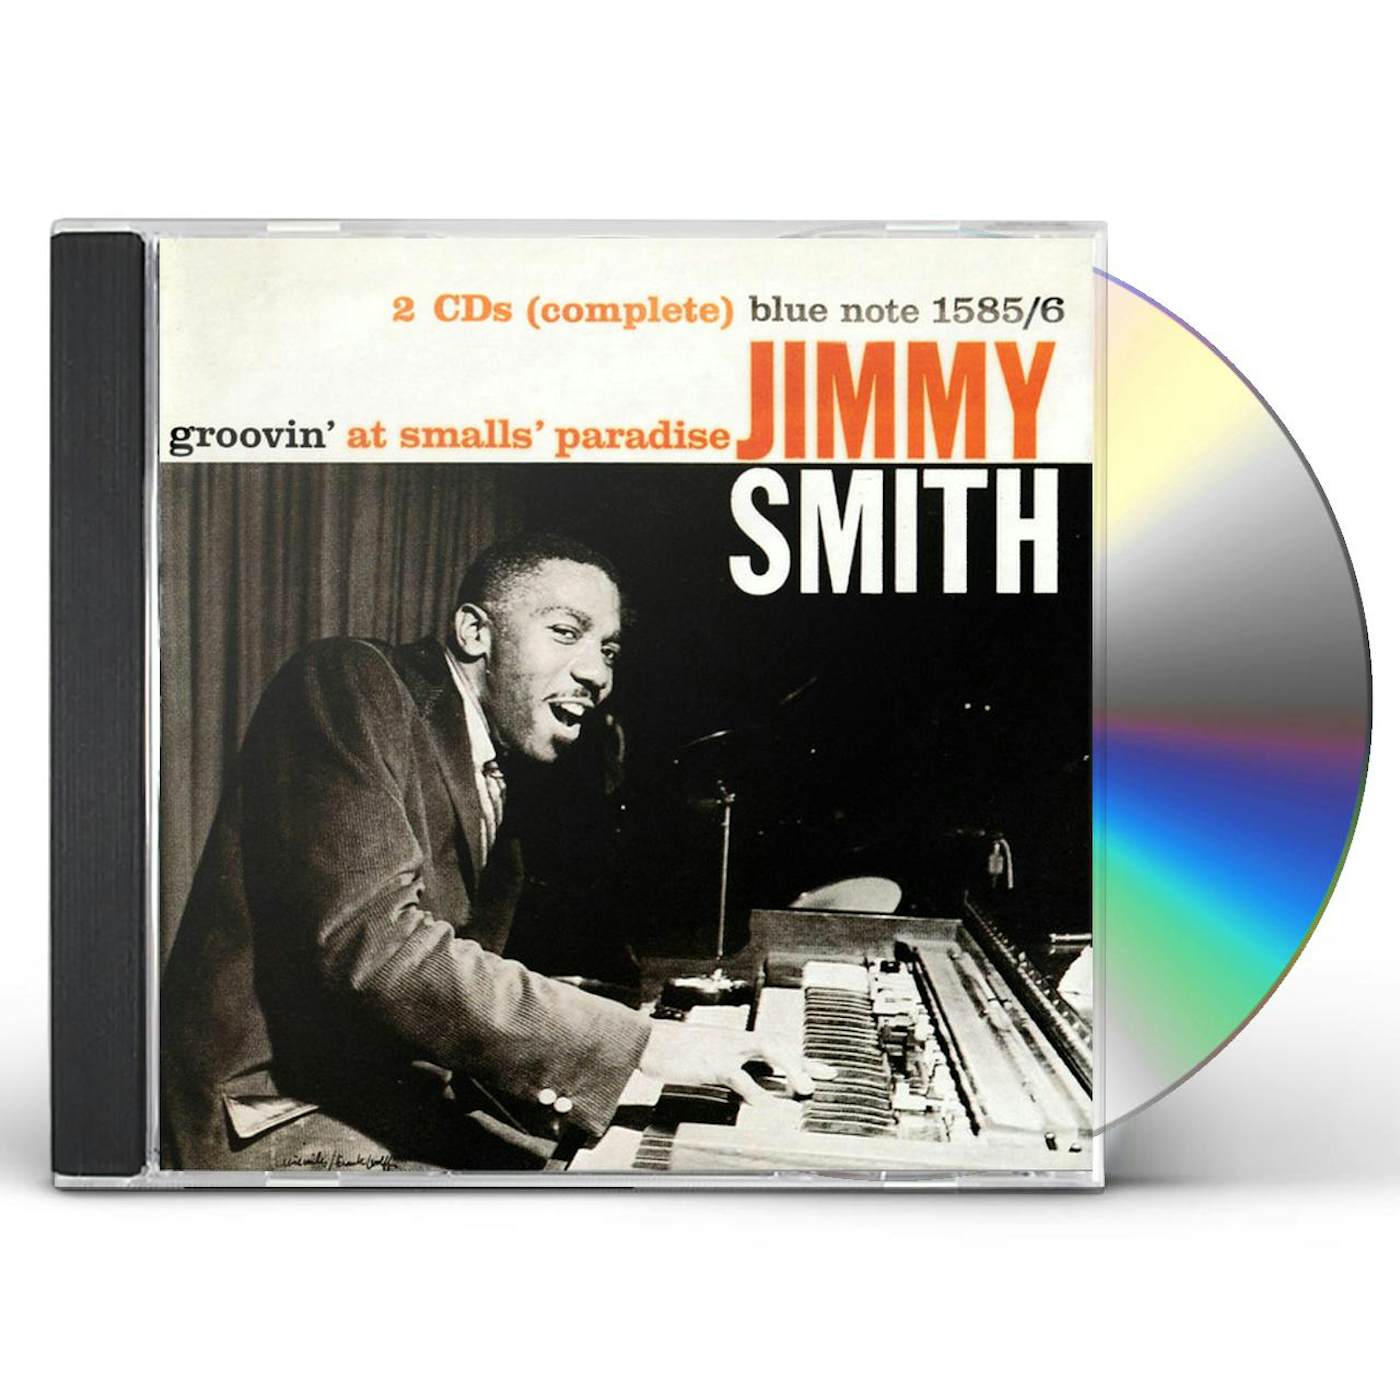 Jimmy Smith GROOVIN' AT SMALL'S PARADISE CD